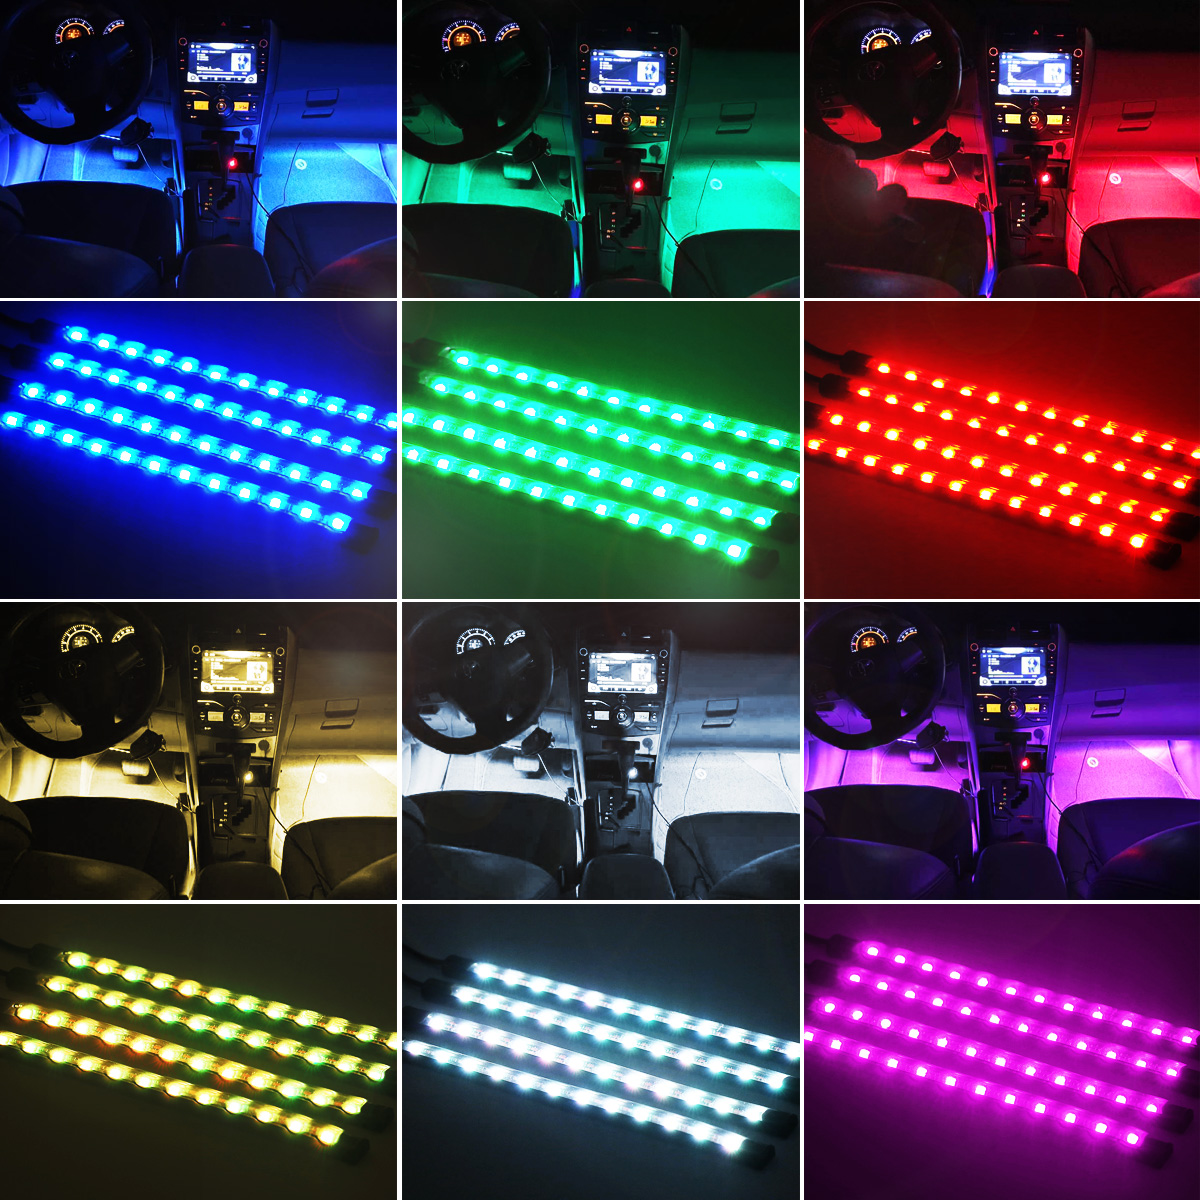 4Pcs Car RGB 12LED Interior Atmosphere Decorative Light Multi-Colorful Support Sound Control Function Remote Control USB for Car Home - Auto GoShop